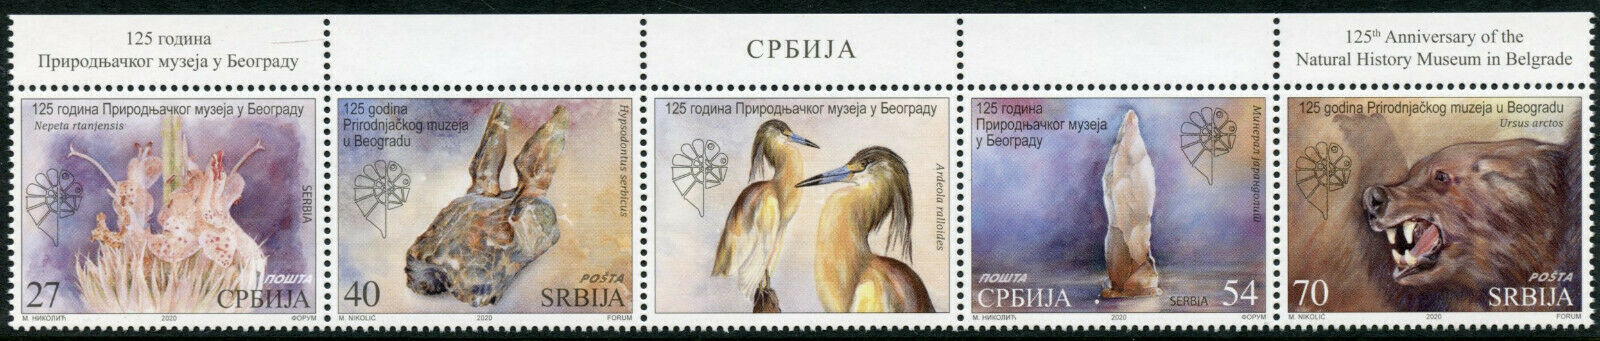 Serbia Fossils Stamps 2020 MNH National History Museum Museums 4v Strip A